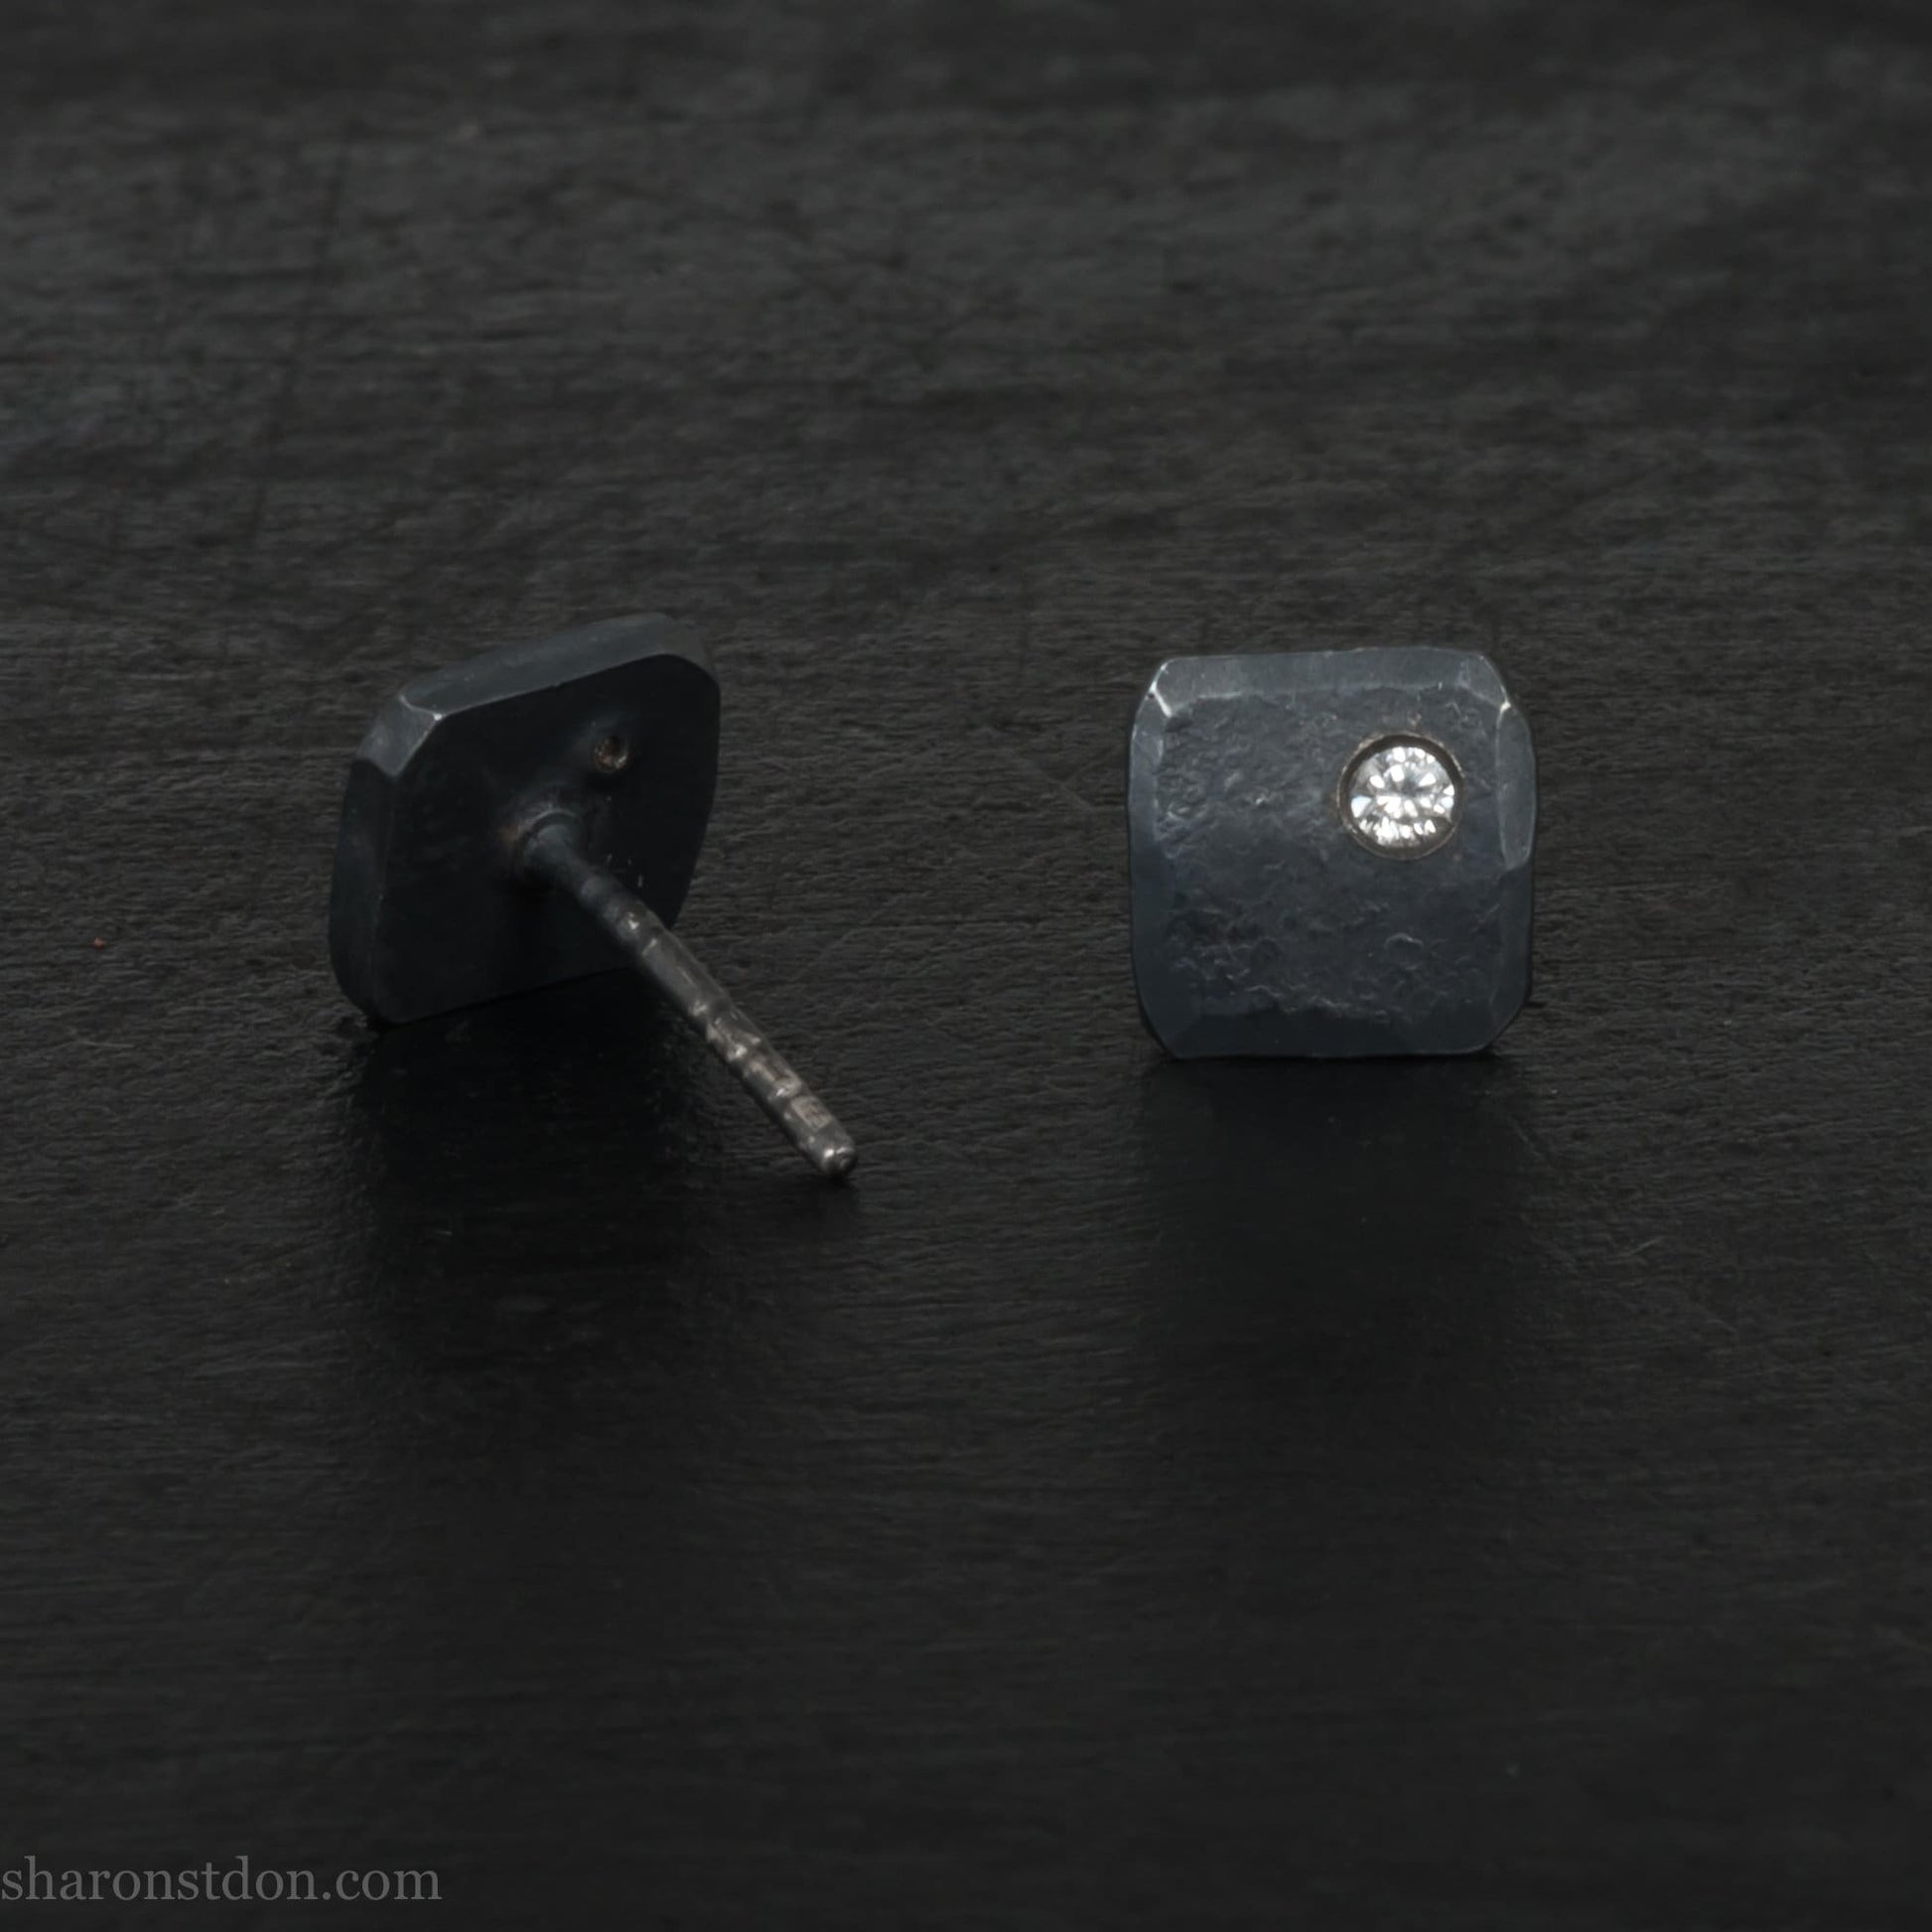 7mm x 7mm square, oxidized black, 925 sterling silver stud earrings with Canadian diamond in the corner. Handmade by Sharon SaintDon in North America with Canadamark diamonds for men or women, non binary.